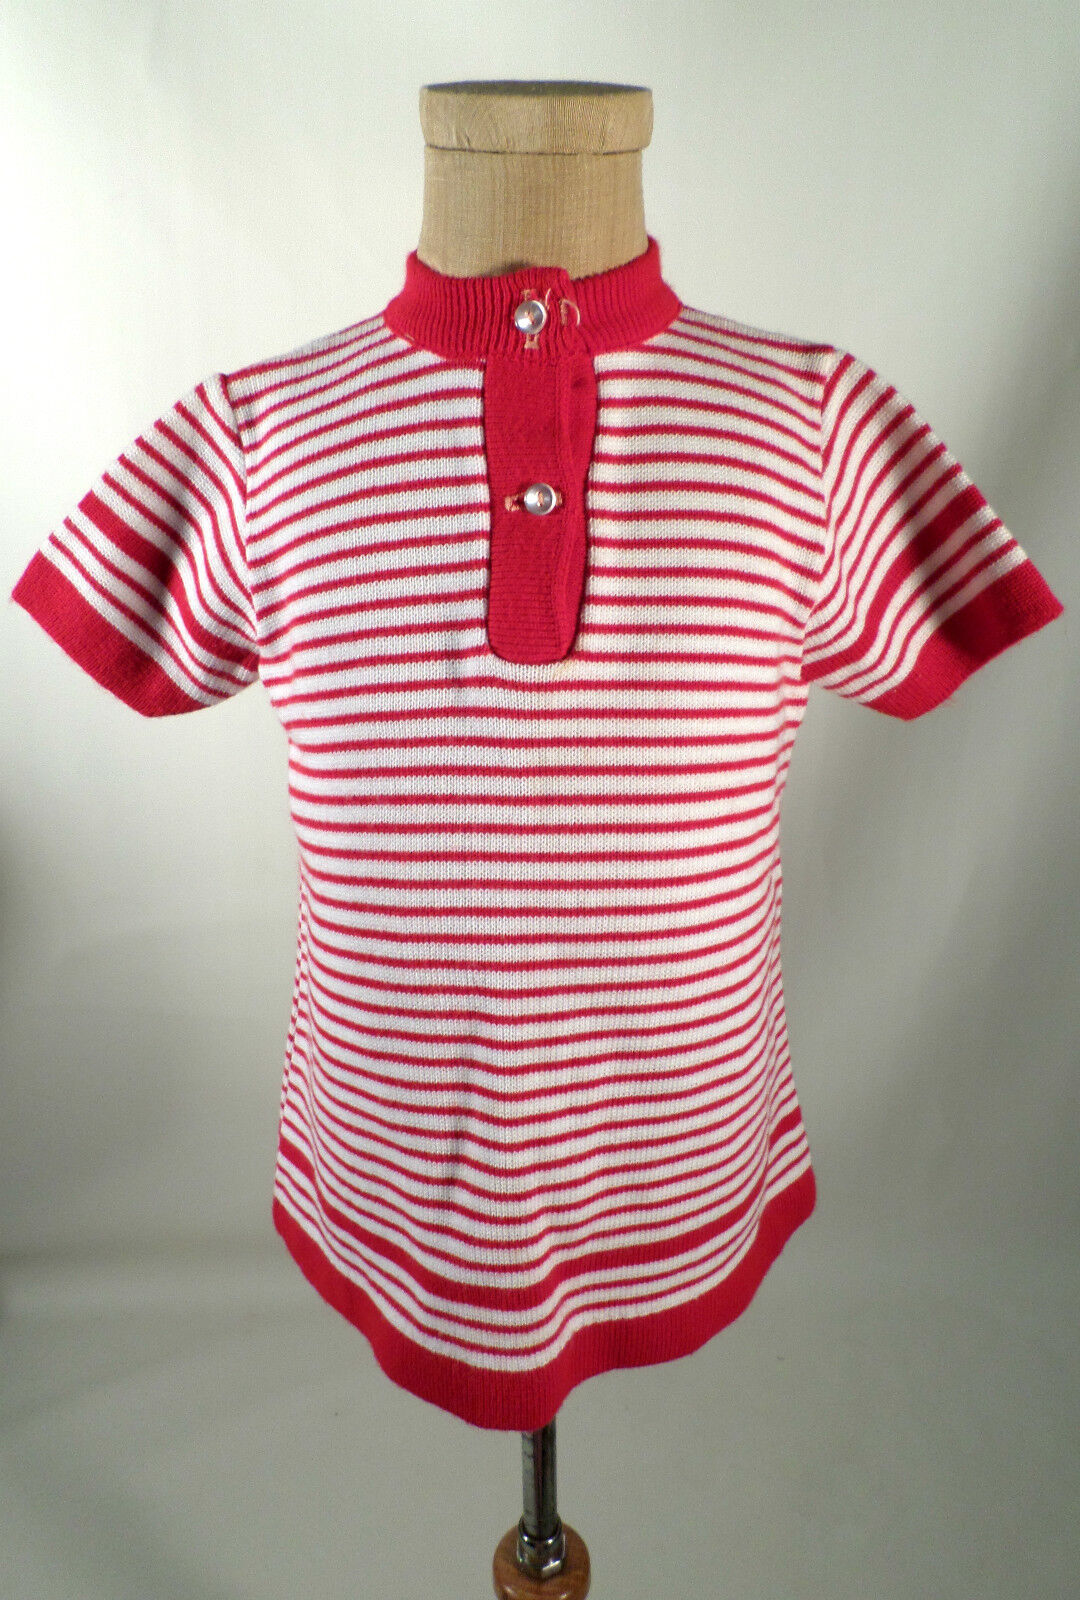 Primary image for CUTE! Vintage 1960s Mod Style Baby Saks Fifth Avenue Striped Sweater Shift Dress